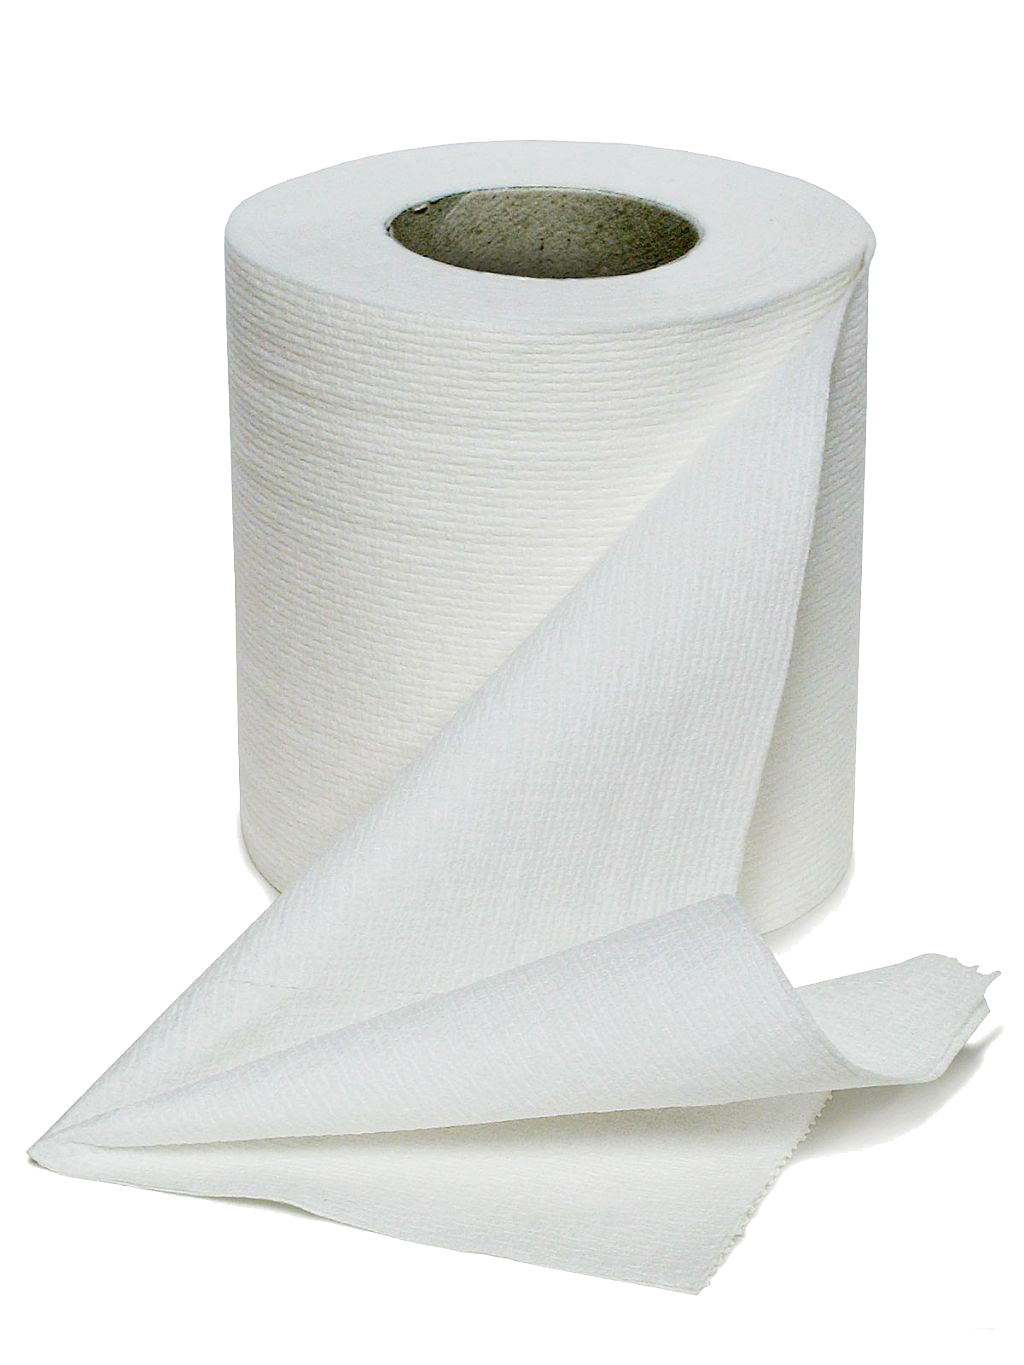 Toilet Paper PNG File